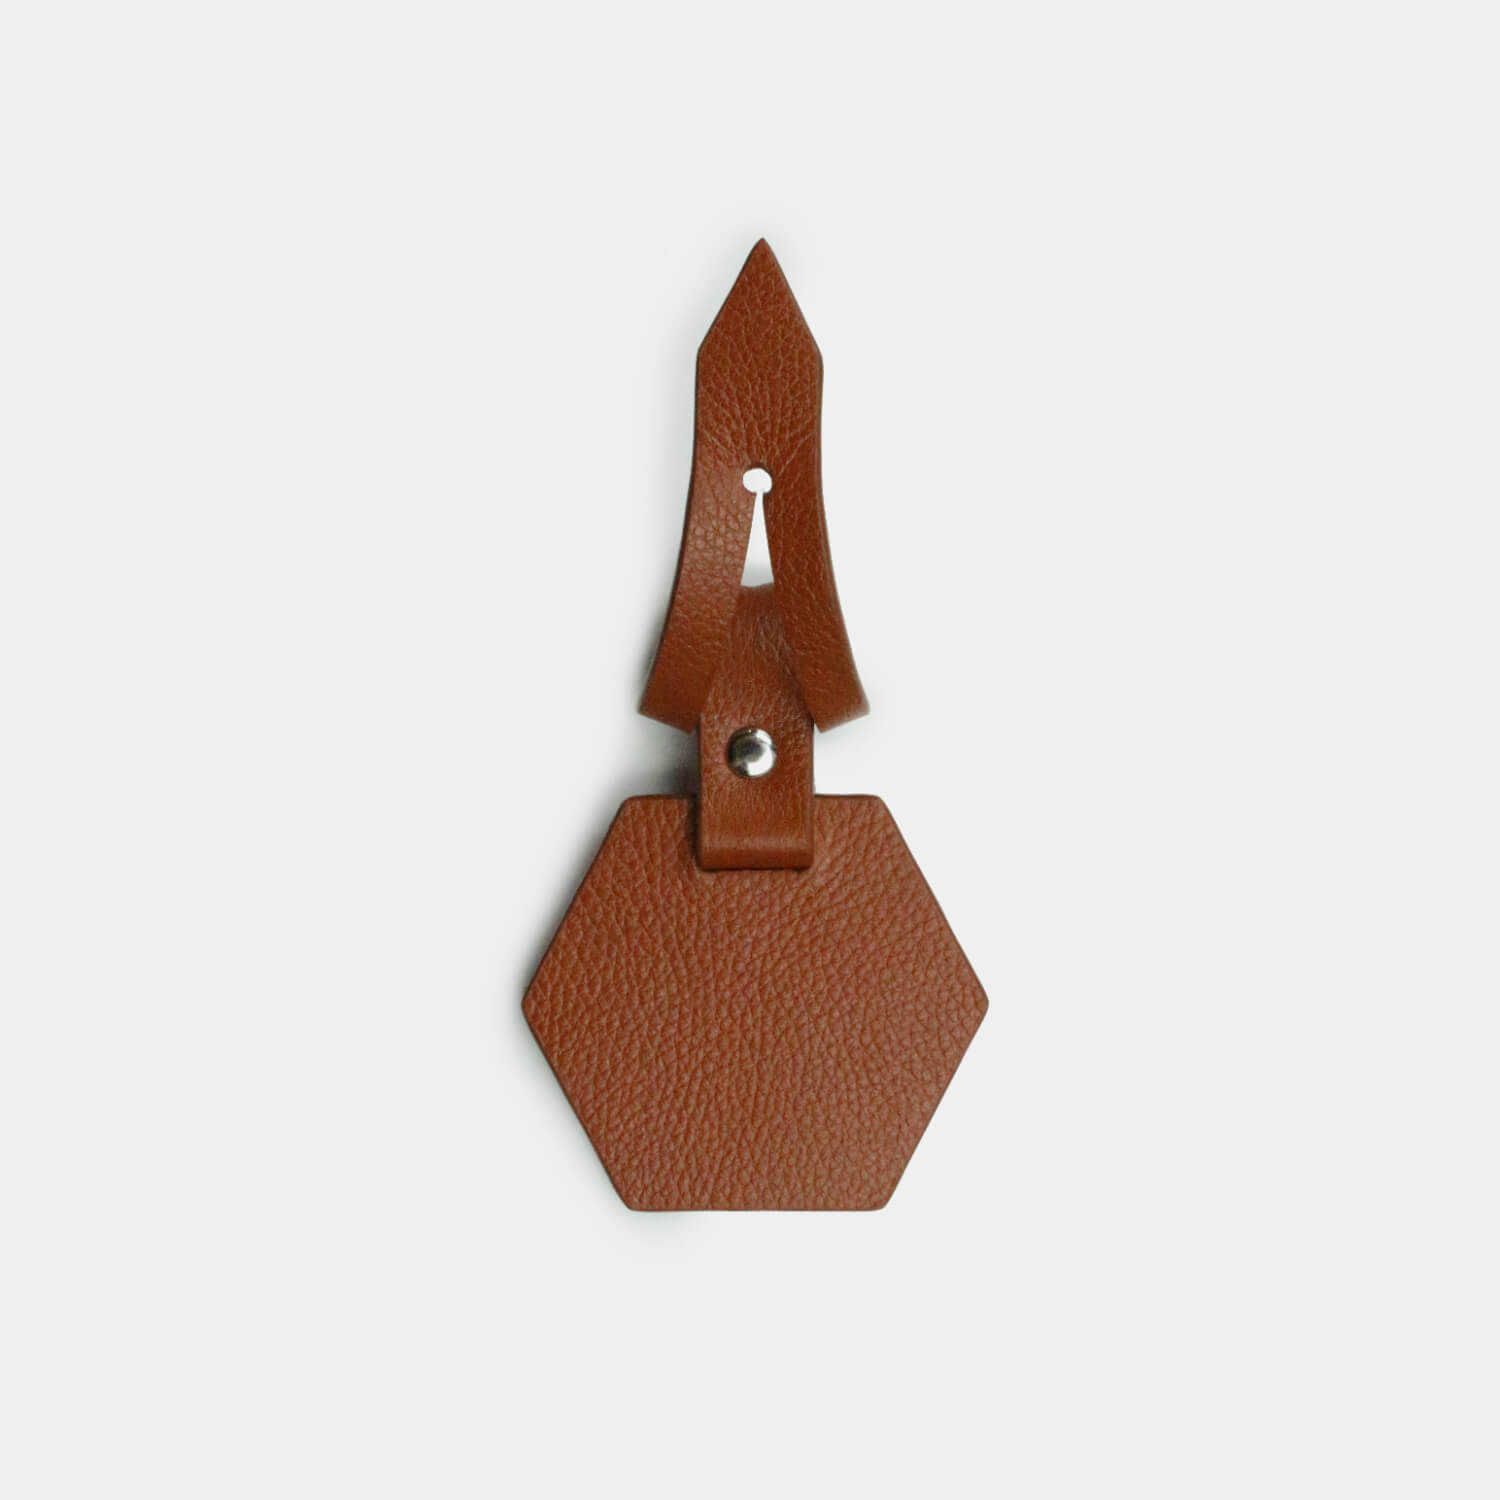 Fine grain leather hexagonal shaped luggage tag and contact details form